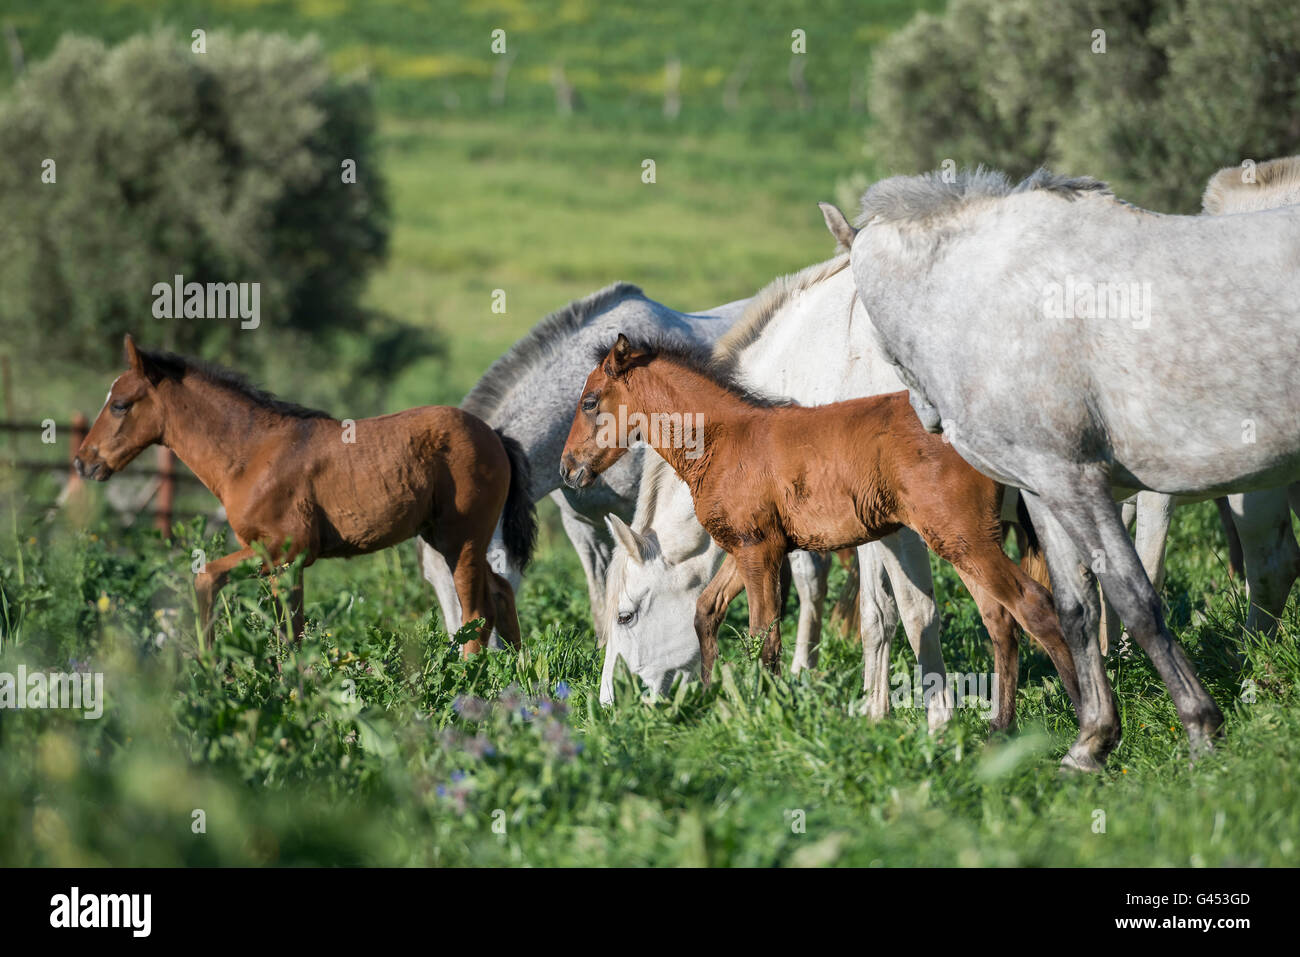 Herd of PRE mares and foals in a field Stock Photo